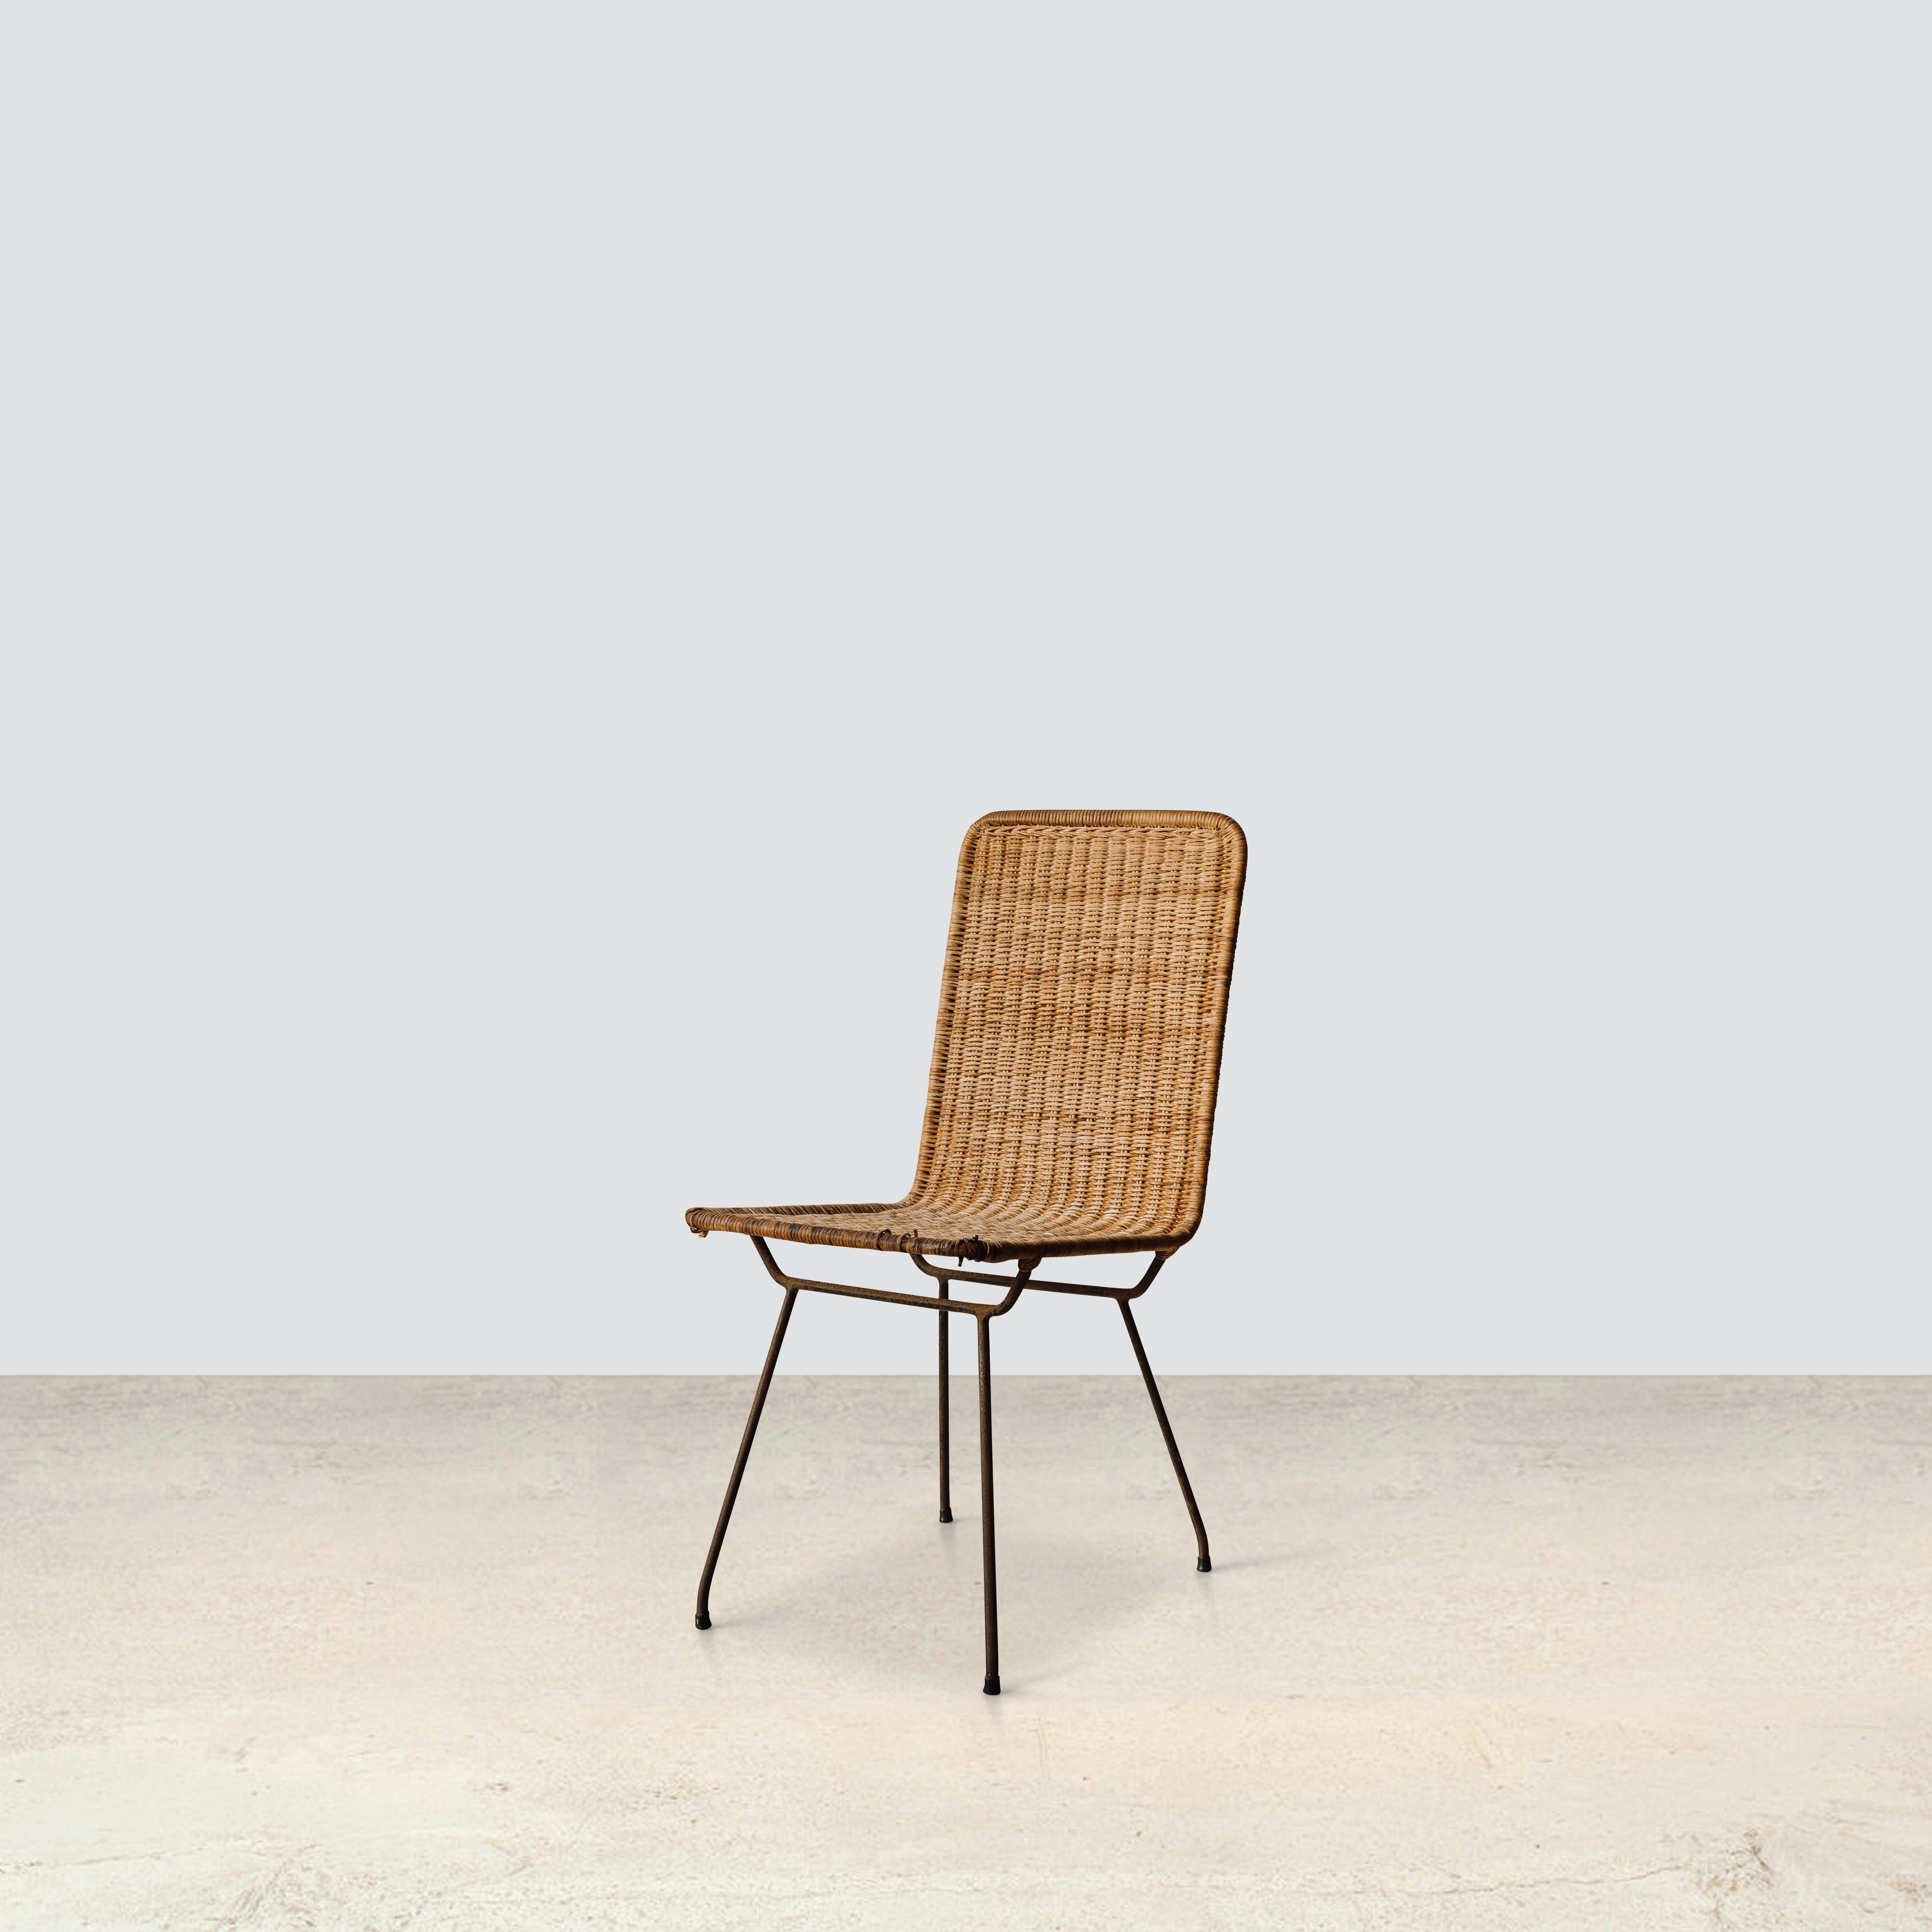 Cane dining chair
By Carlo Hauner 1950 

Set of 6 dining chairs with iron structure and cane covering, designed by the Brazilian modern designer Carlo Hauner in the 1950s.

Provenance
Private collection Sao Paulo 

Materials and